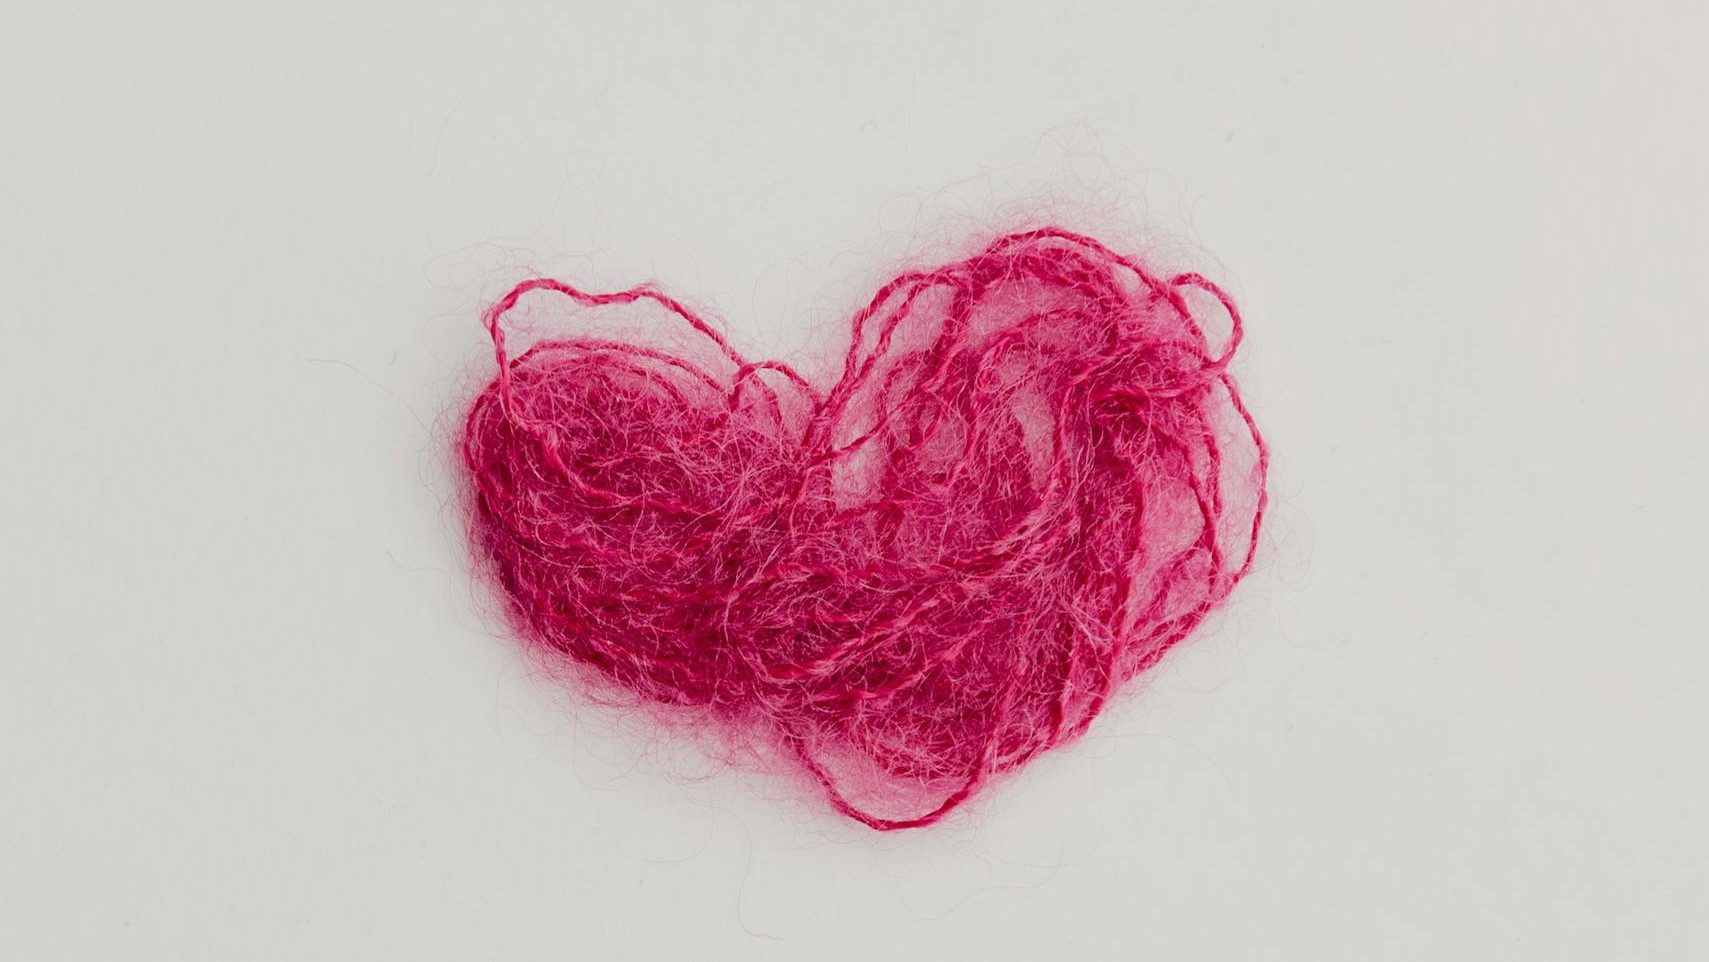 Heart from Wool Thread. Fighting Loneliness Through Connection Strategies